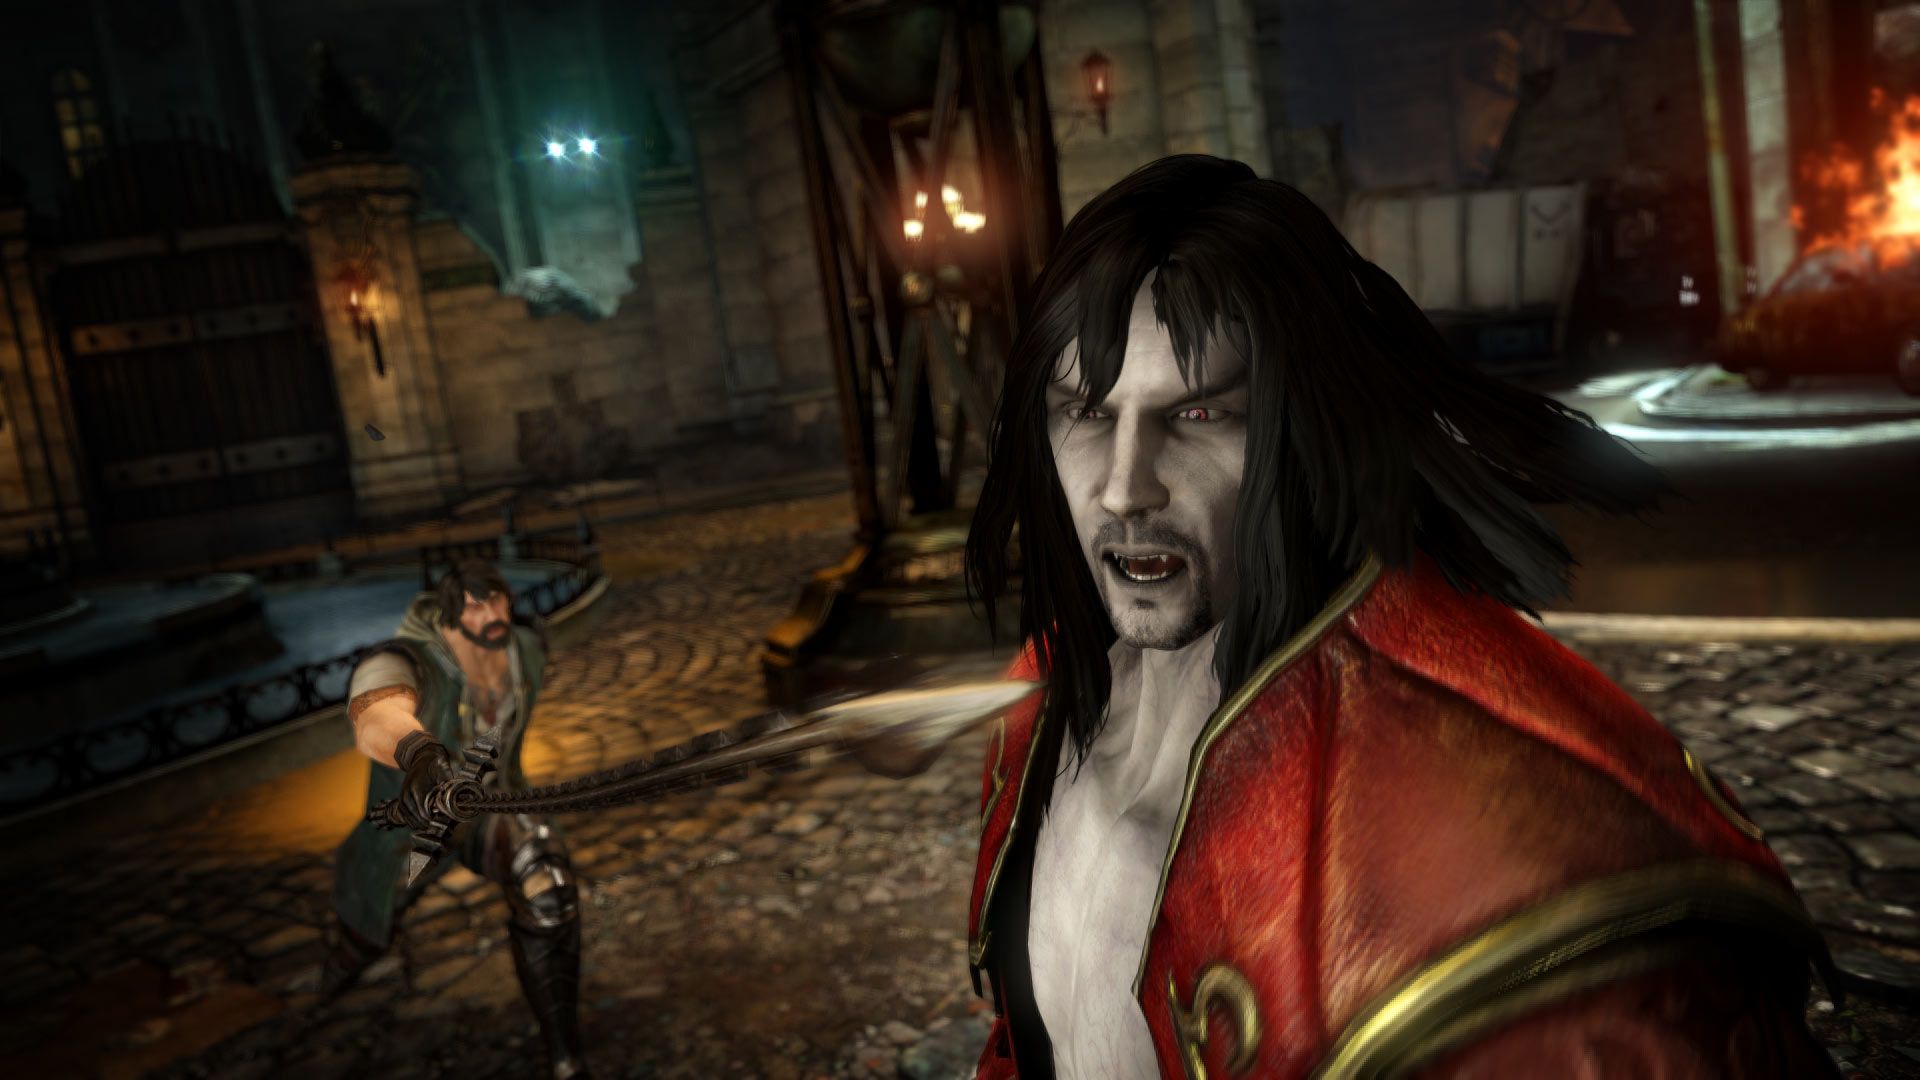 CASTLEVANIA LORDS OF SHADOW] A descent into madness. Some say this